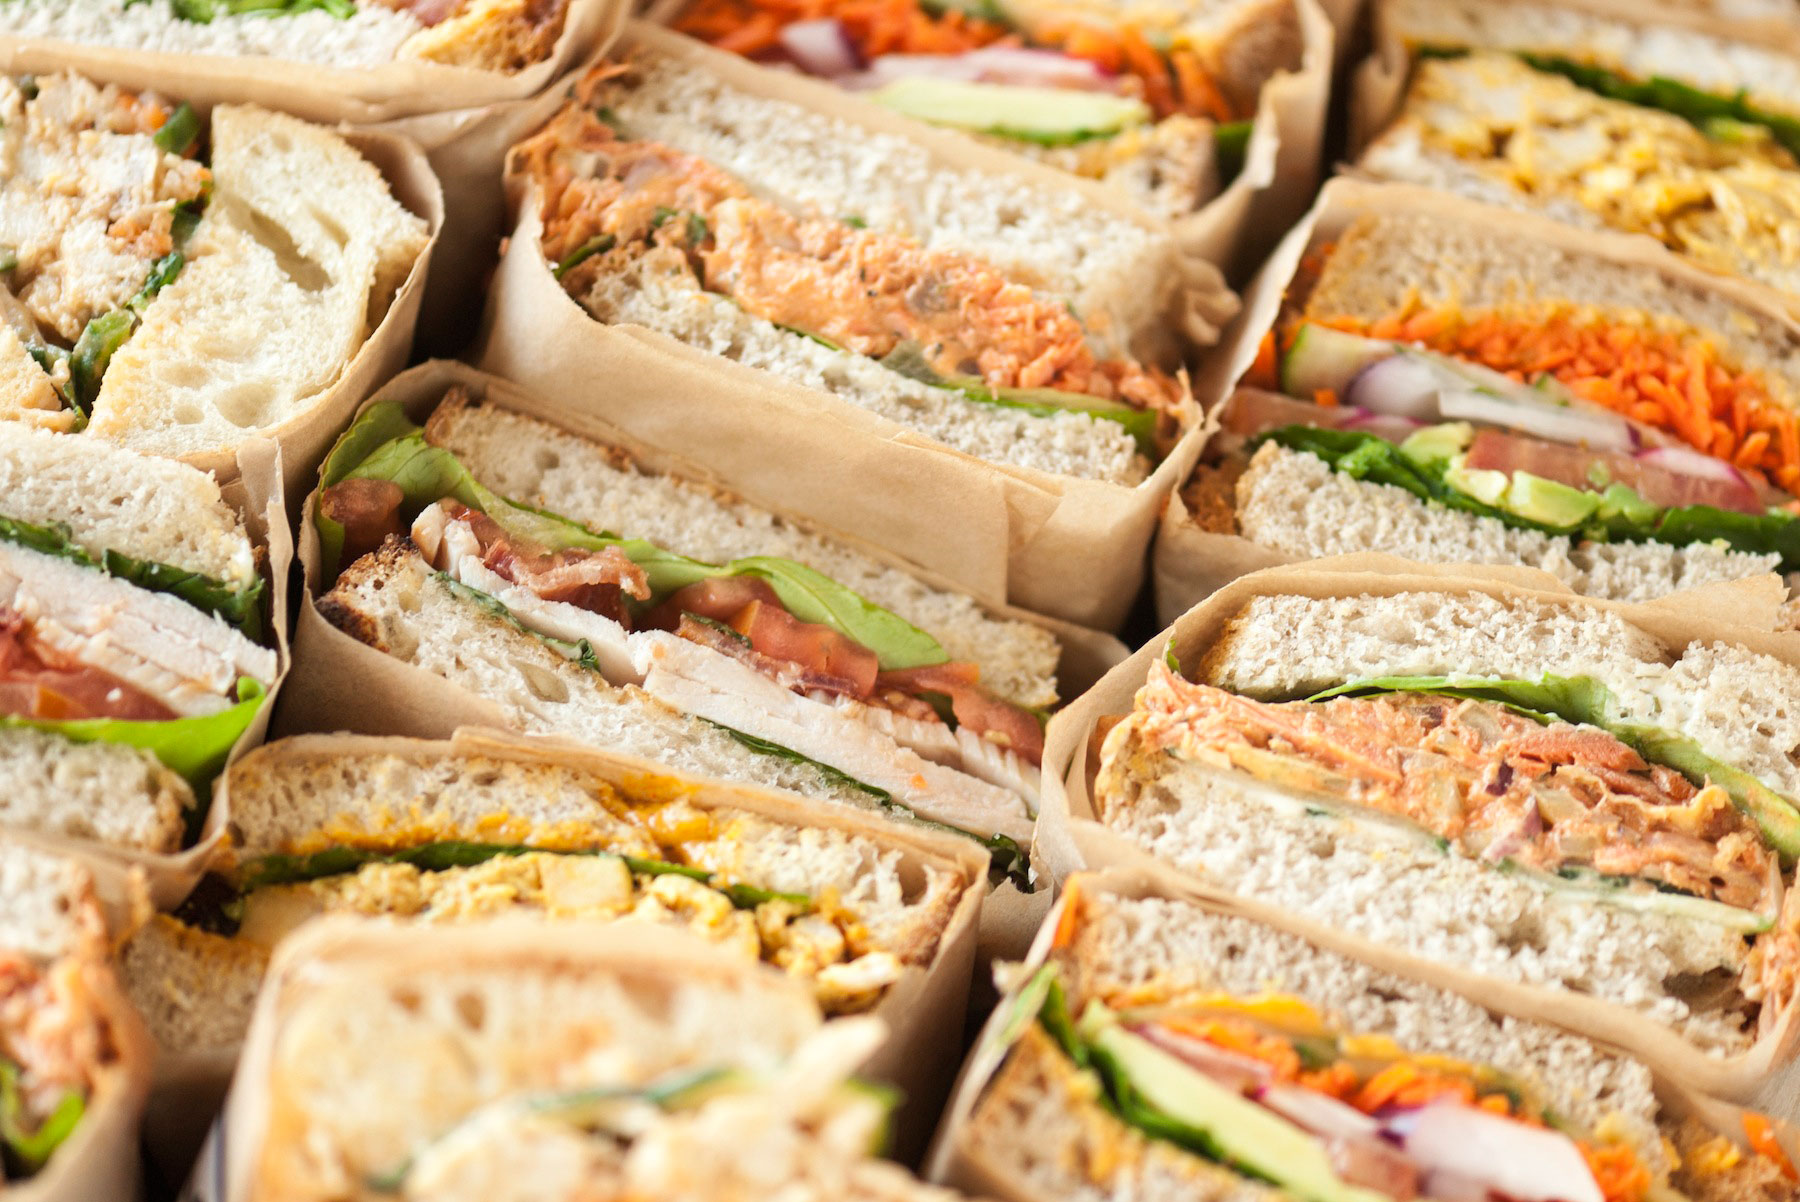 Agraculture-Catering-Sandwiches.jpg